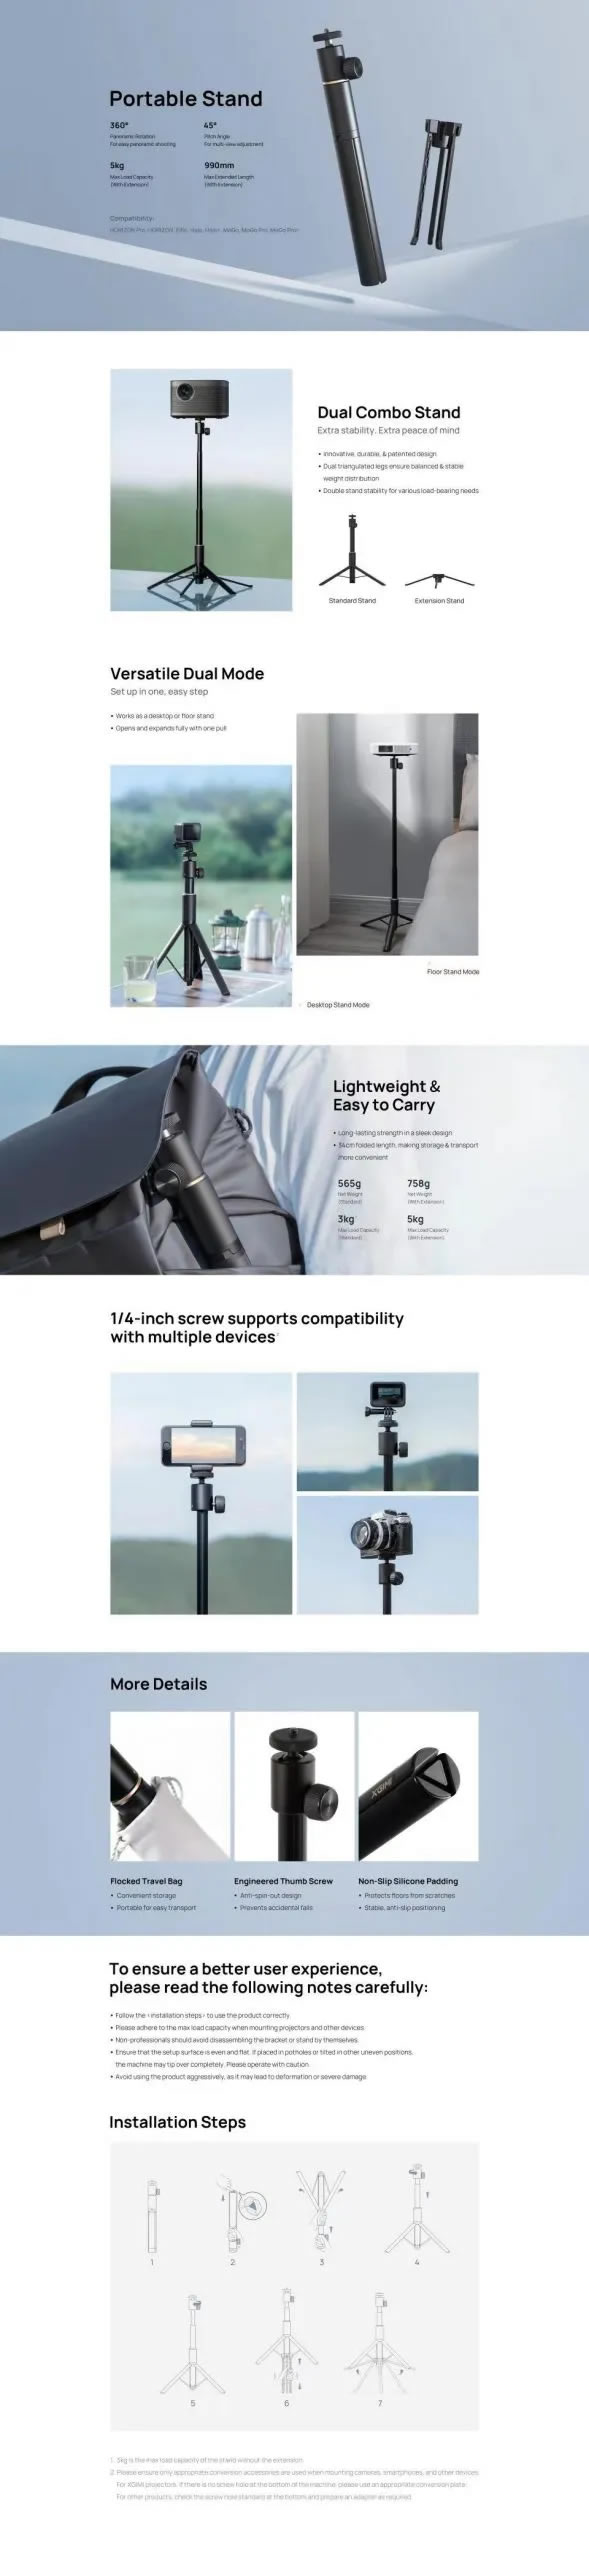 Xgimi portable projector stand specifications